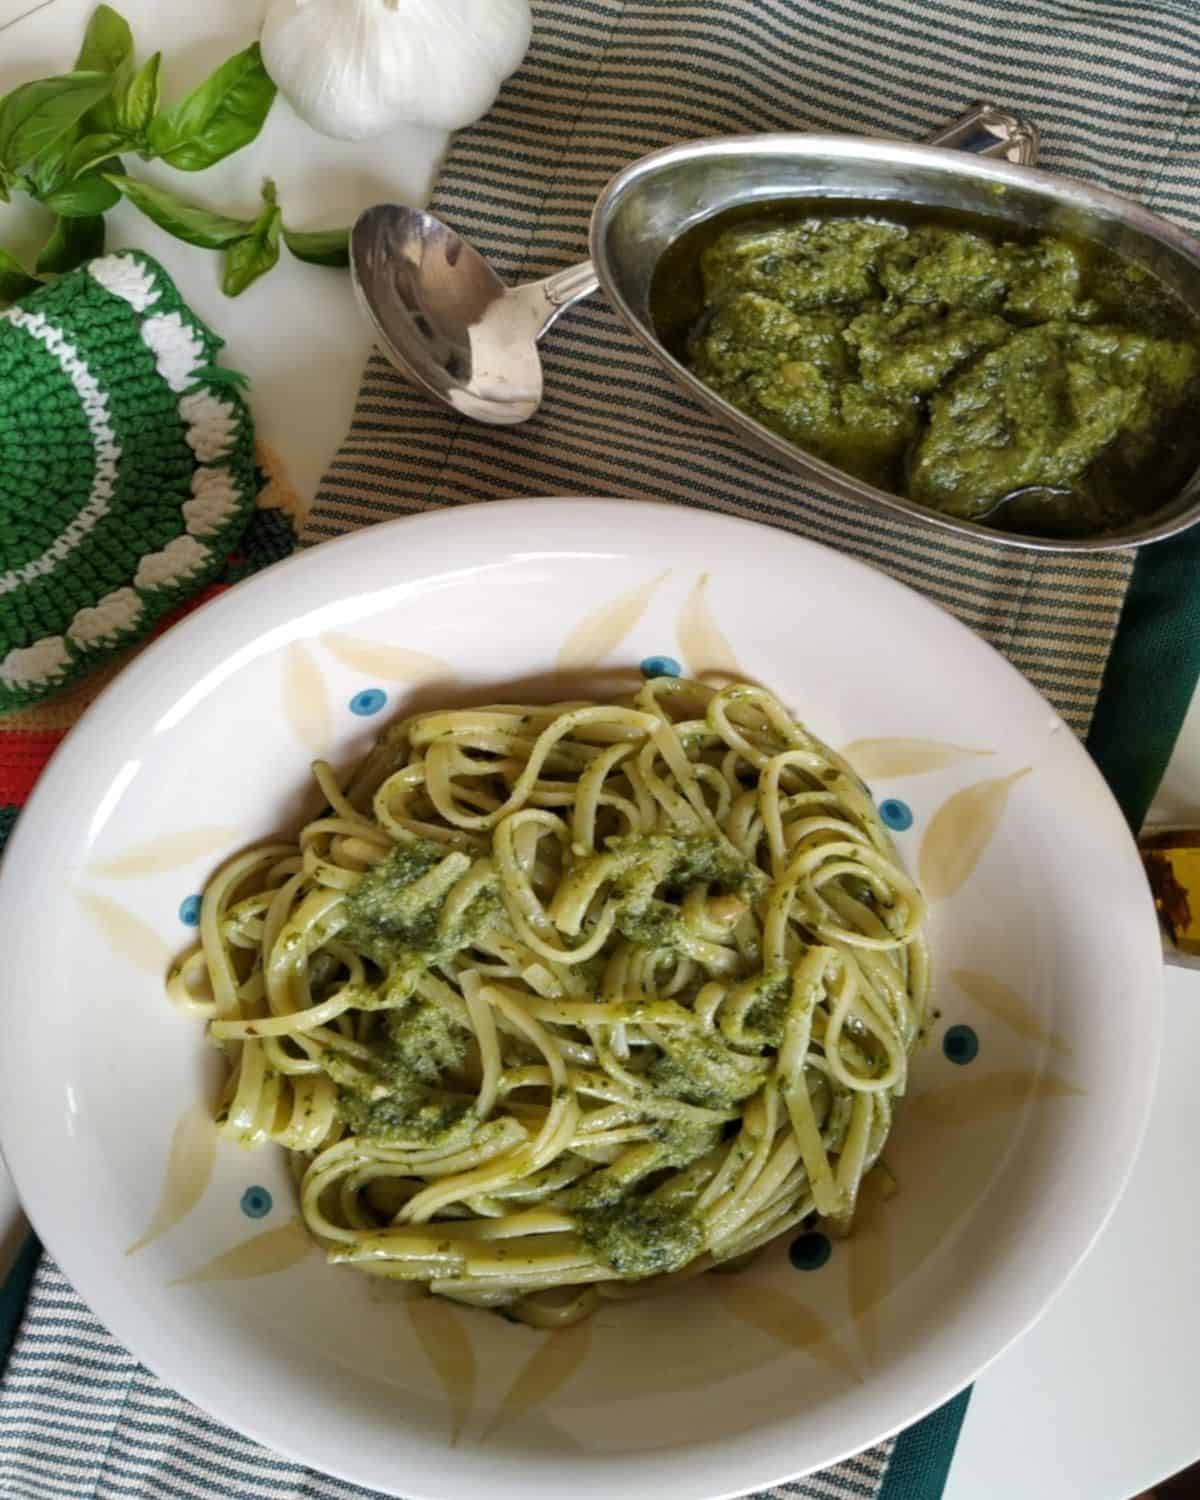 Pesto pasta from above in a white plate. A bowl with pesto on the side